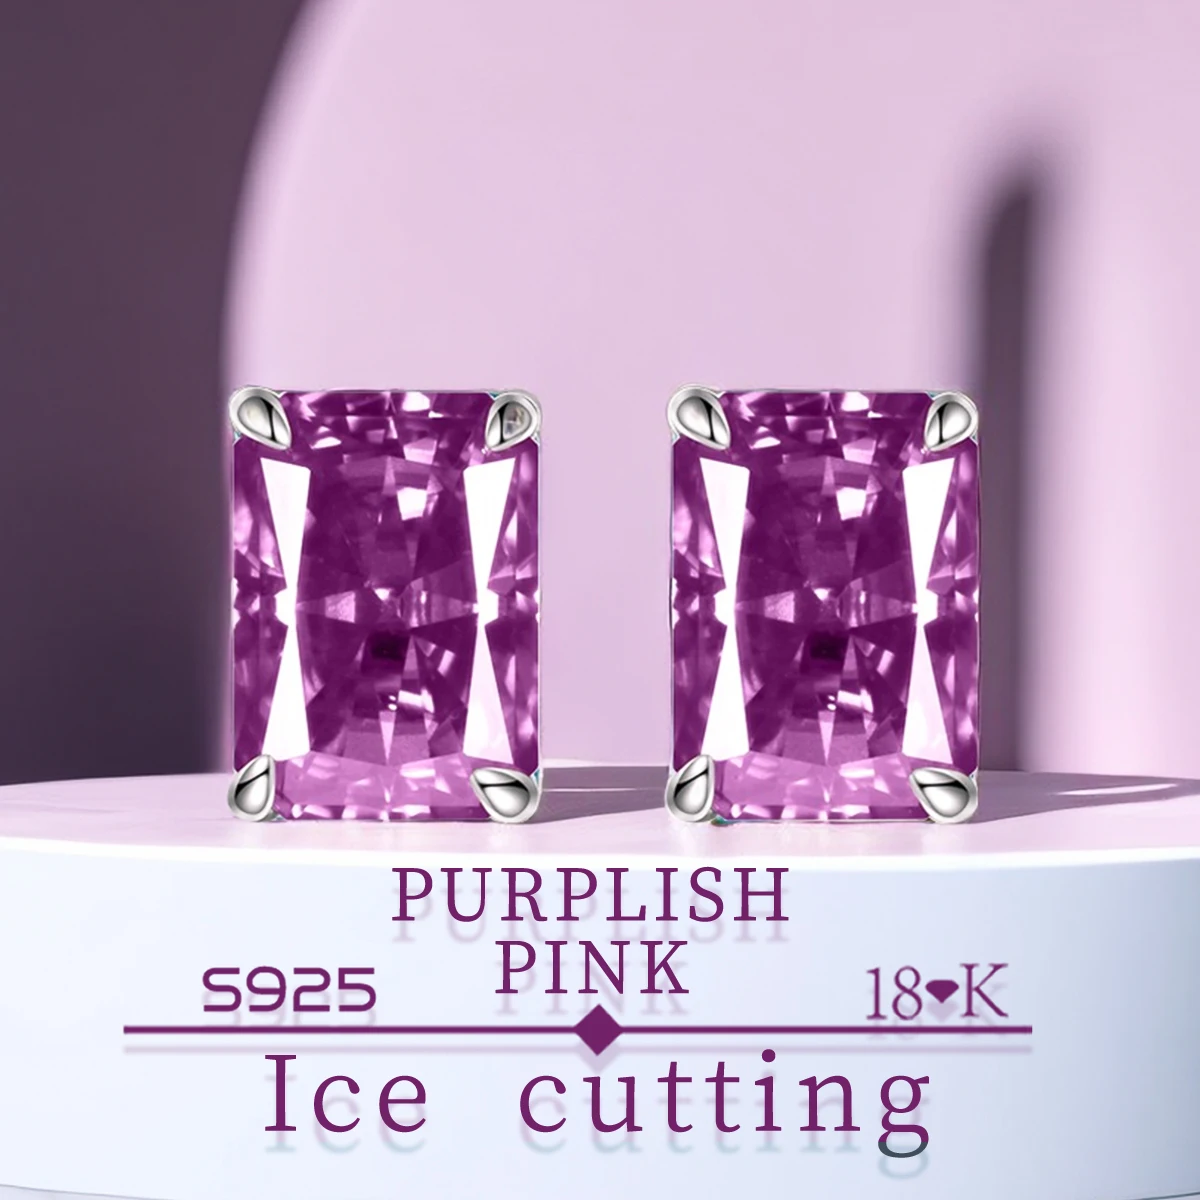 

S925 Sterling Silver Fine Quality 7carat 1 double PURPLISH PINK Zircon Sparkle 5A good quality ice Cut Ladies earrings